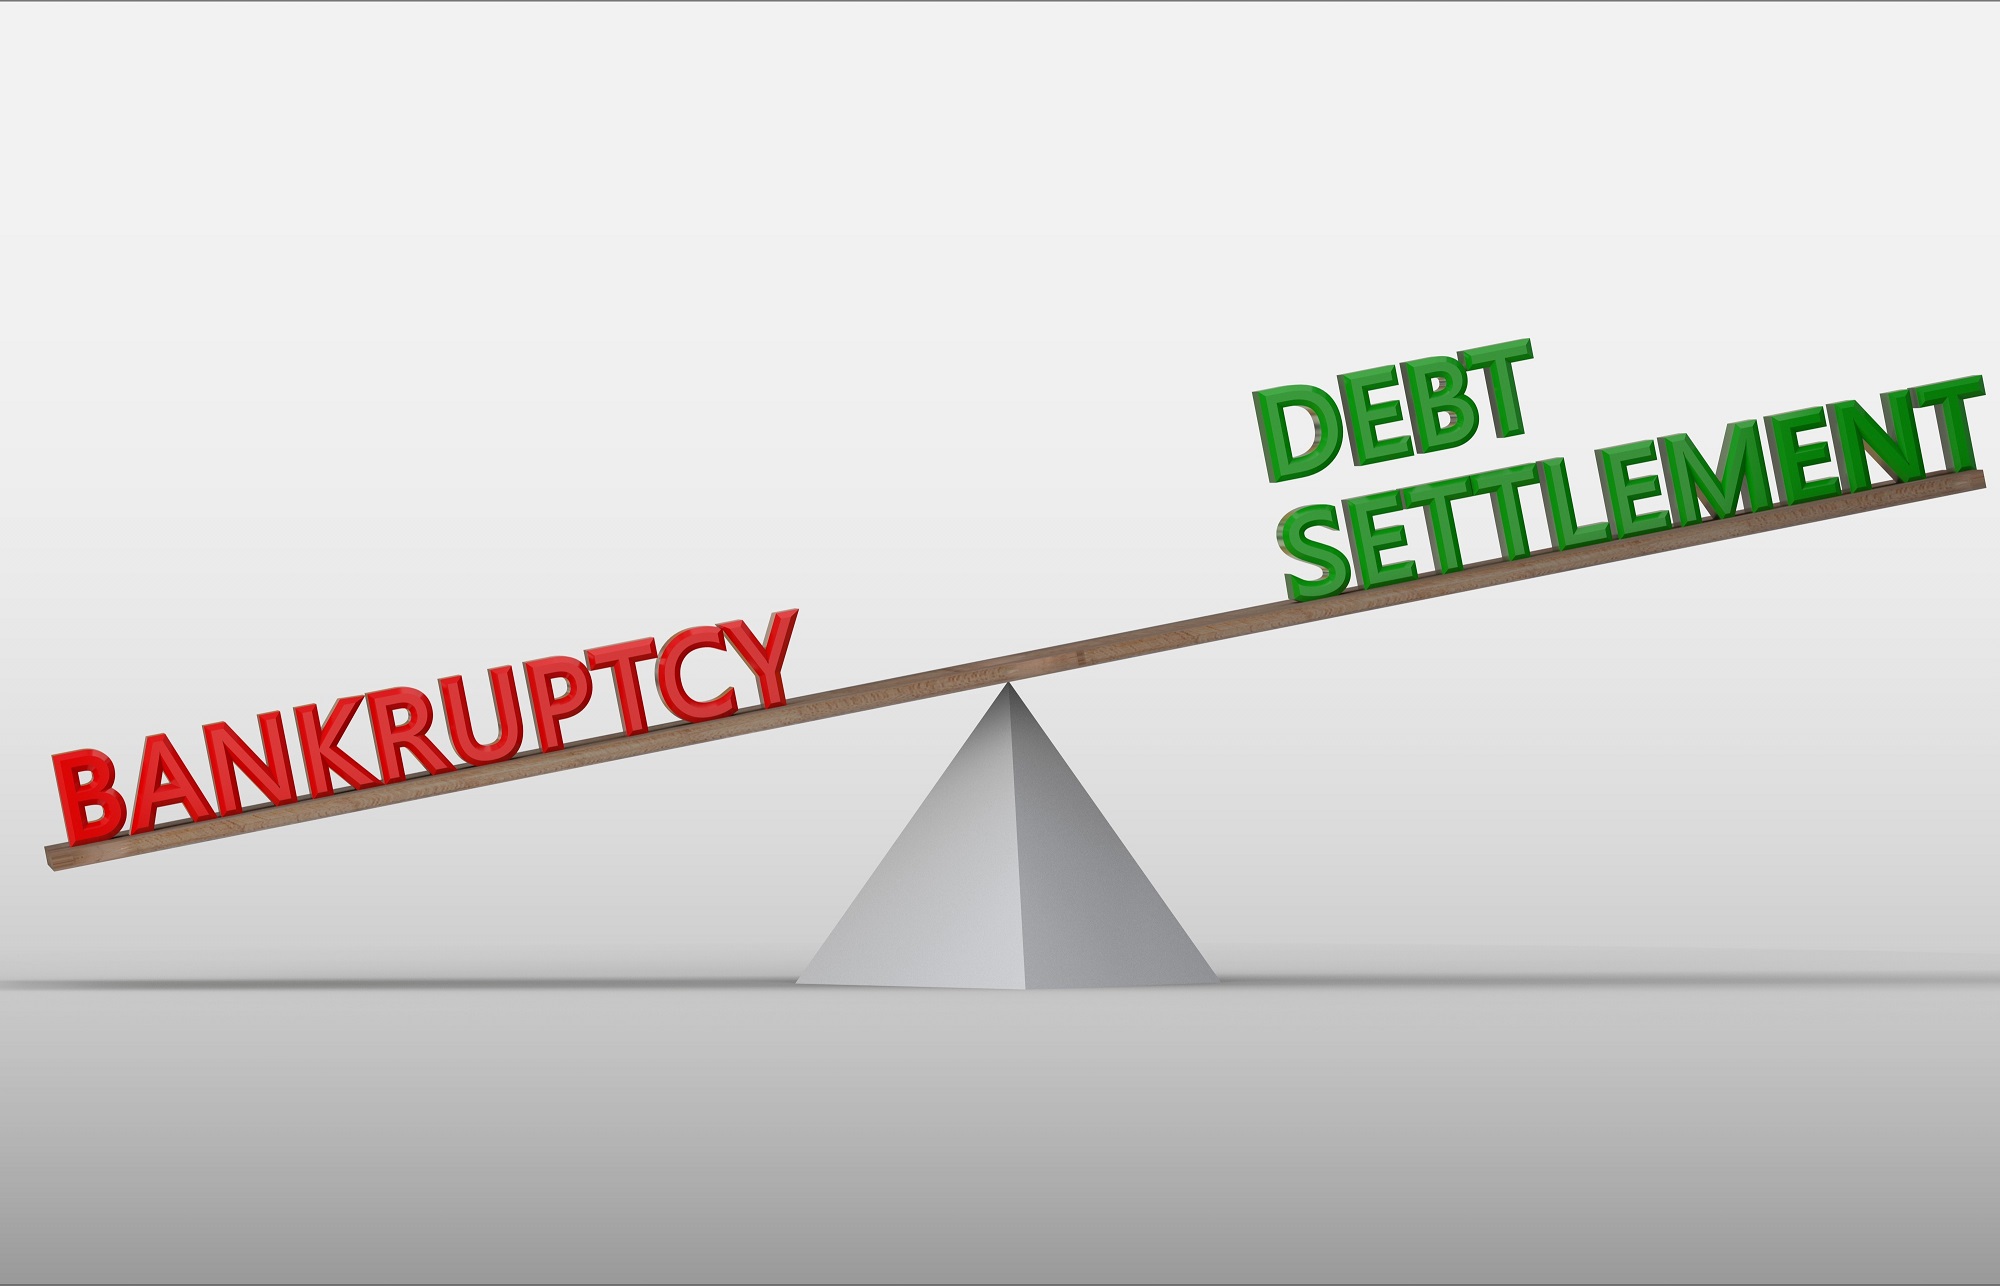 Tired of creditors calling? Is It Better to Pay Off Debt or Settle It?